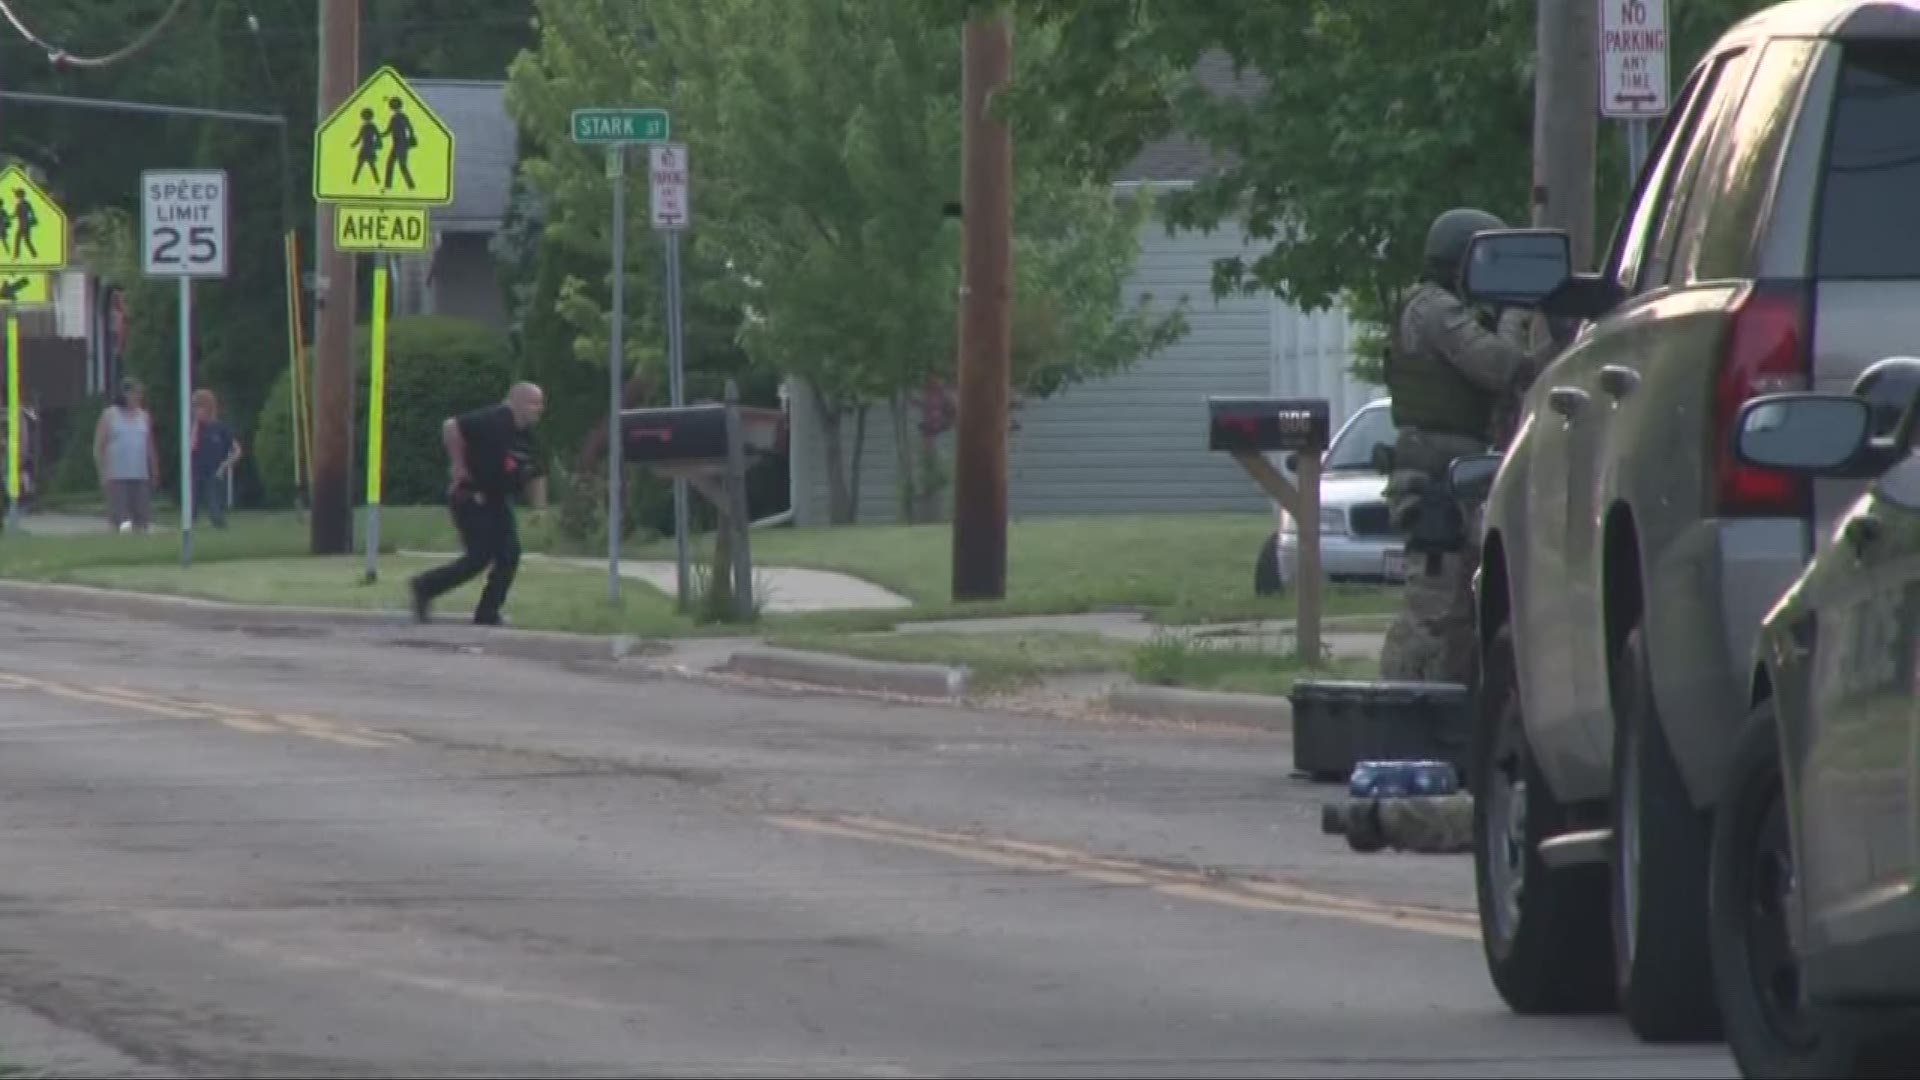 June 1, 2018: Police from multiple agencies were at the scene for more than 12 hours at a standoff at a Lorain County home.